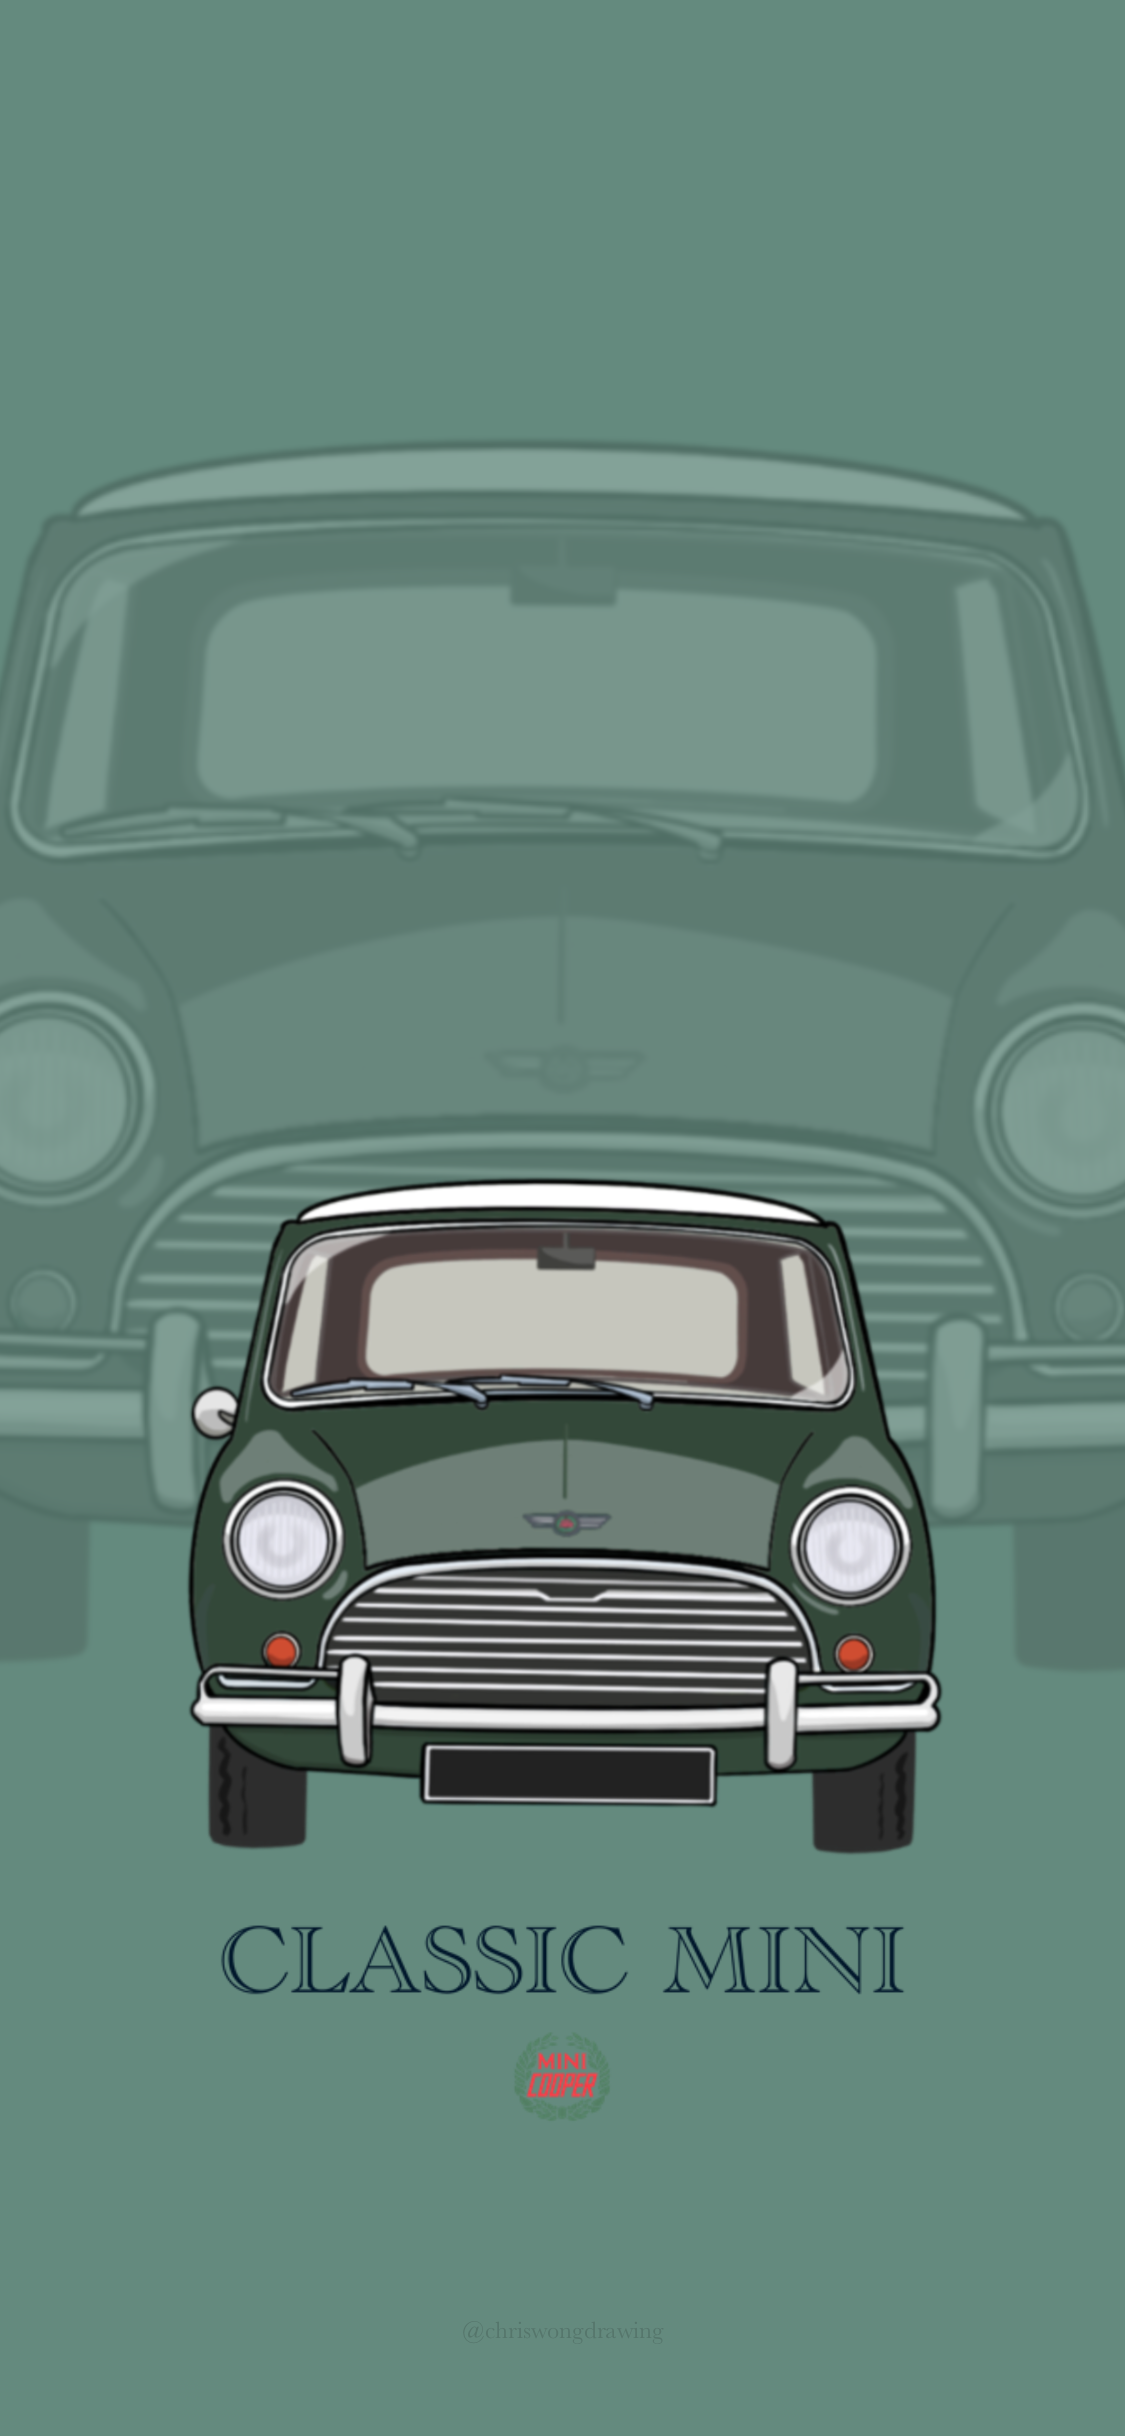 Classic Mini Iphone Wallpaper Green By Cwdrawing On Deviantart